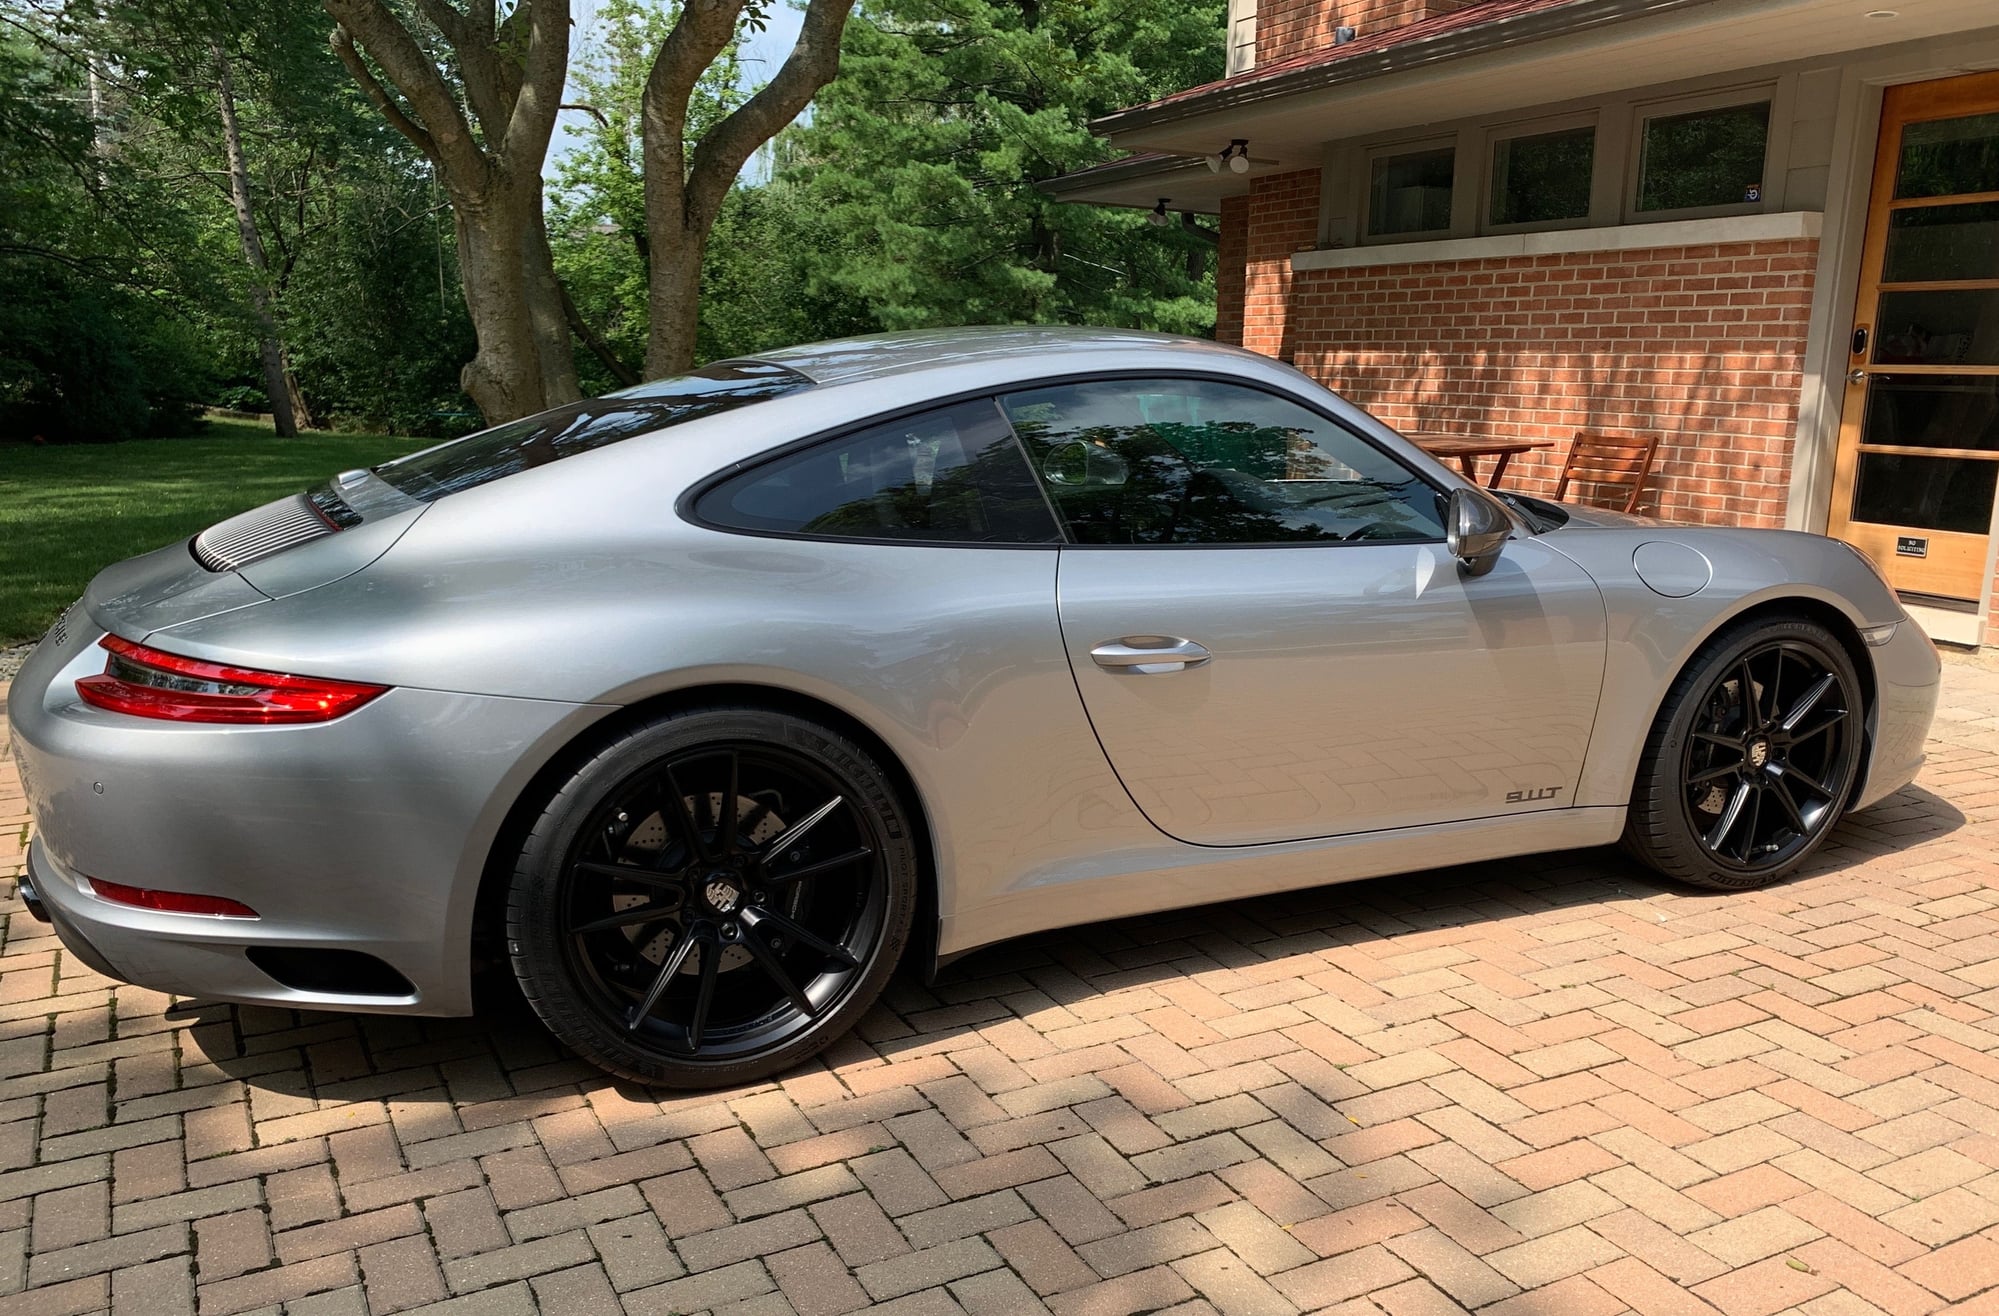 2018 Porsche 911 - 18 Carrera T, manual, driver's build - Used - VIN WP0AA2A92JS106501 - 6,200 Miles - 6 cyl - 2WD - Manual - Coupe - Silver - Northfield, IL 60093, United States